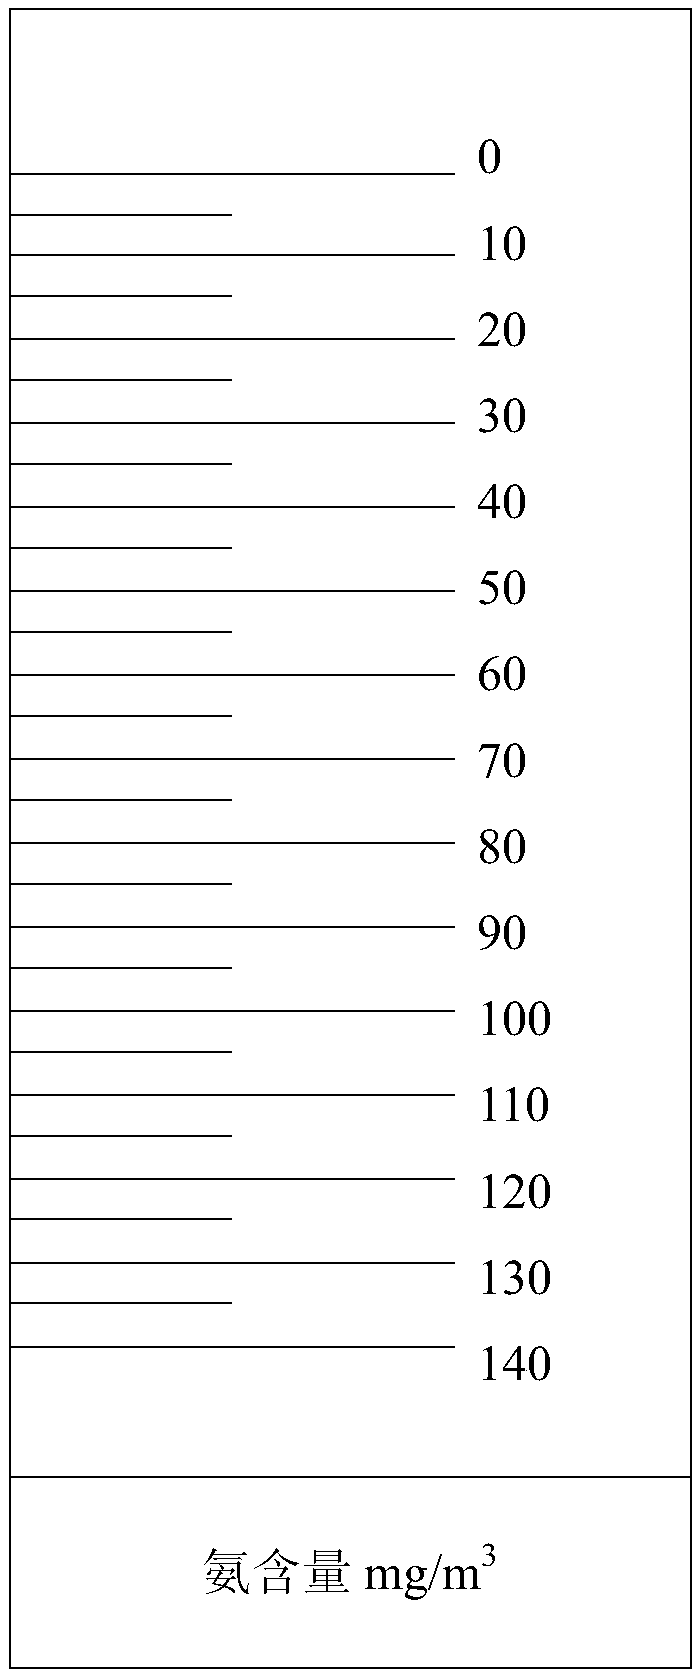 Simple test paper for determining ammonia in air, and preparation and determination methods thereof